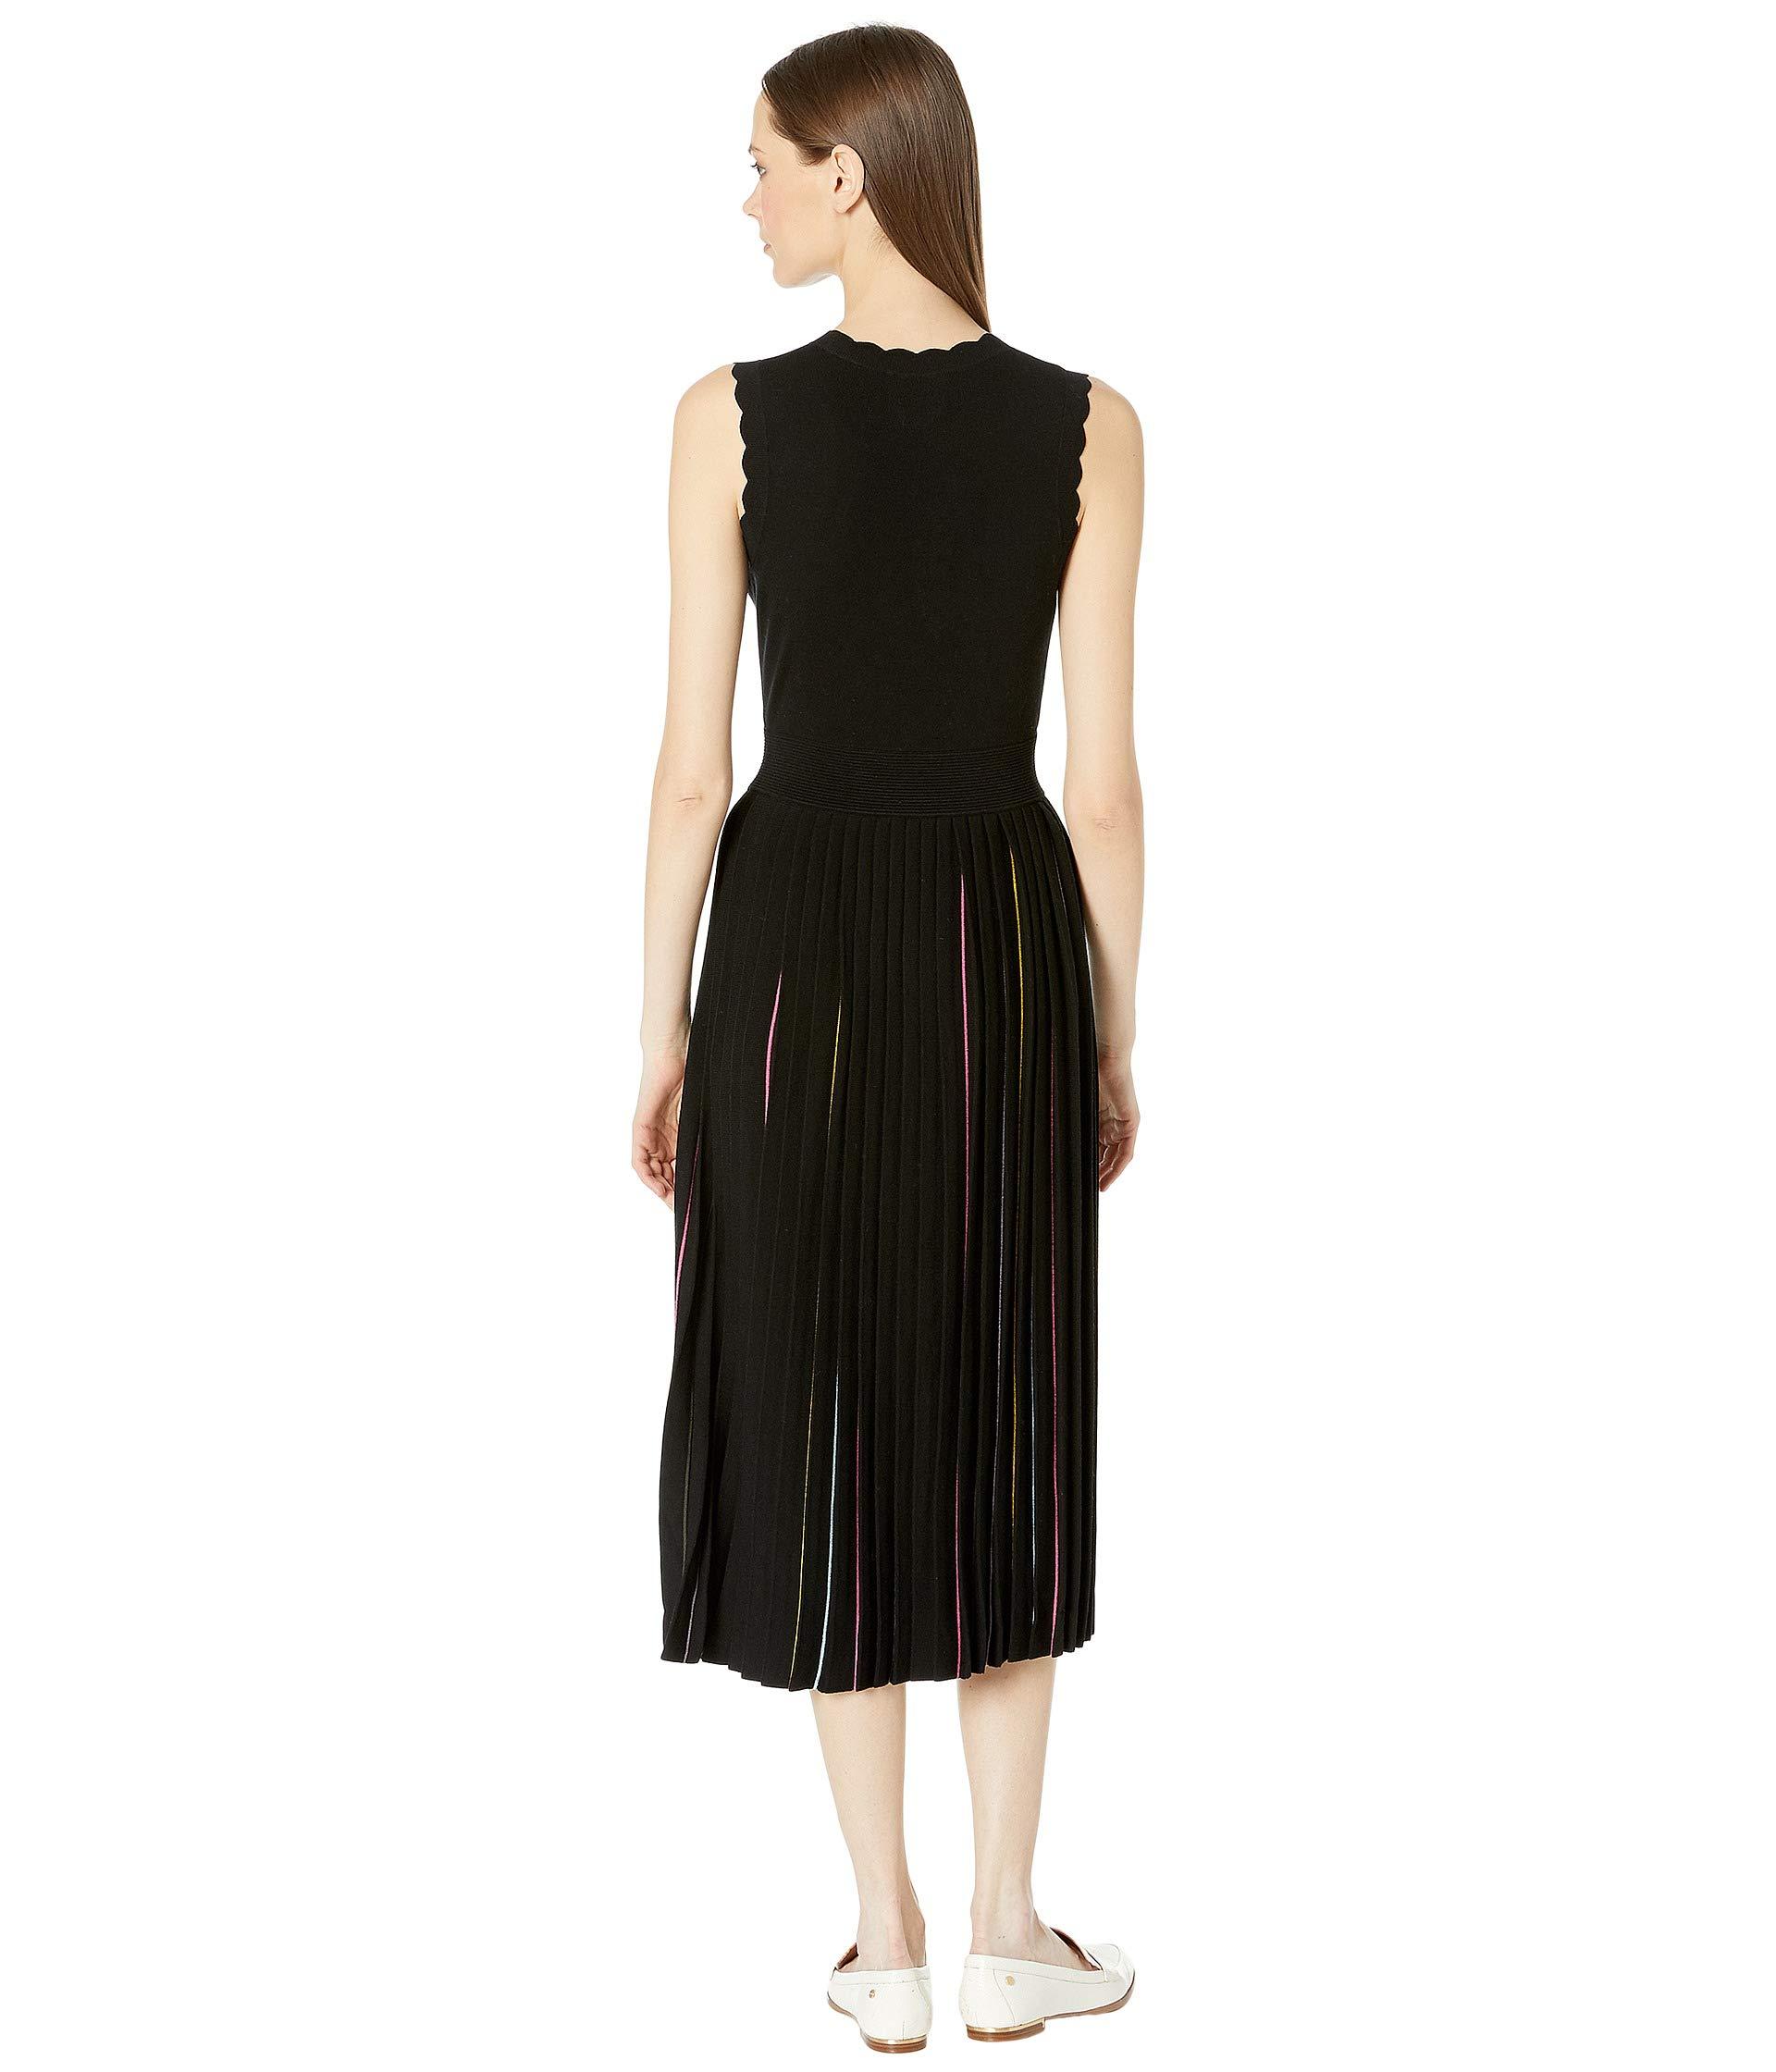 Kate Spade Synthetic Pleated Sweater Dress in Black - Lyst